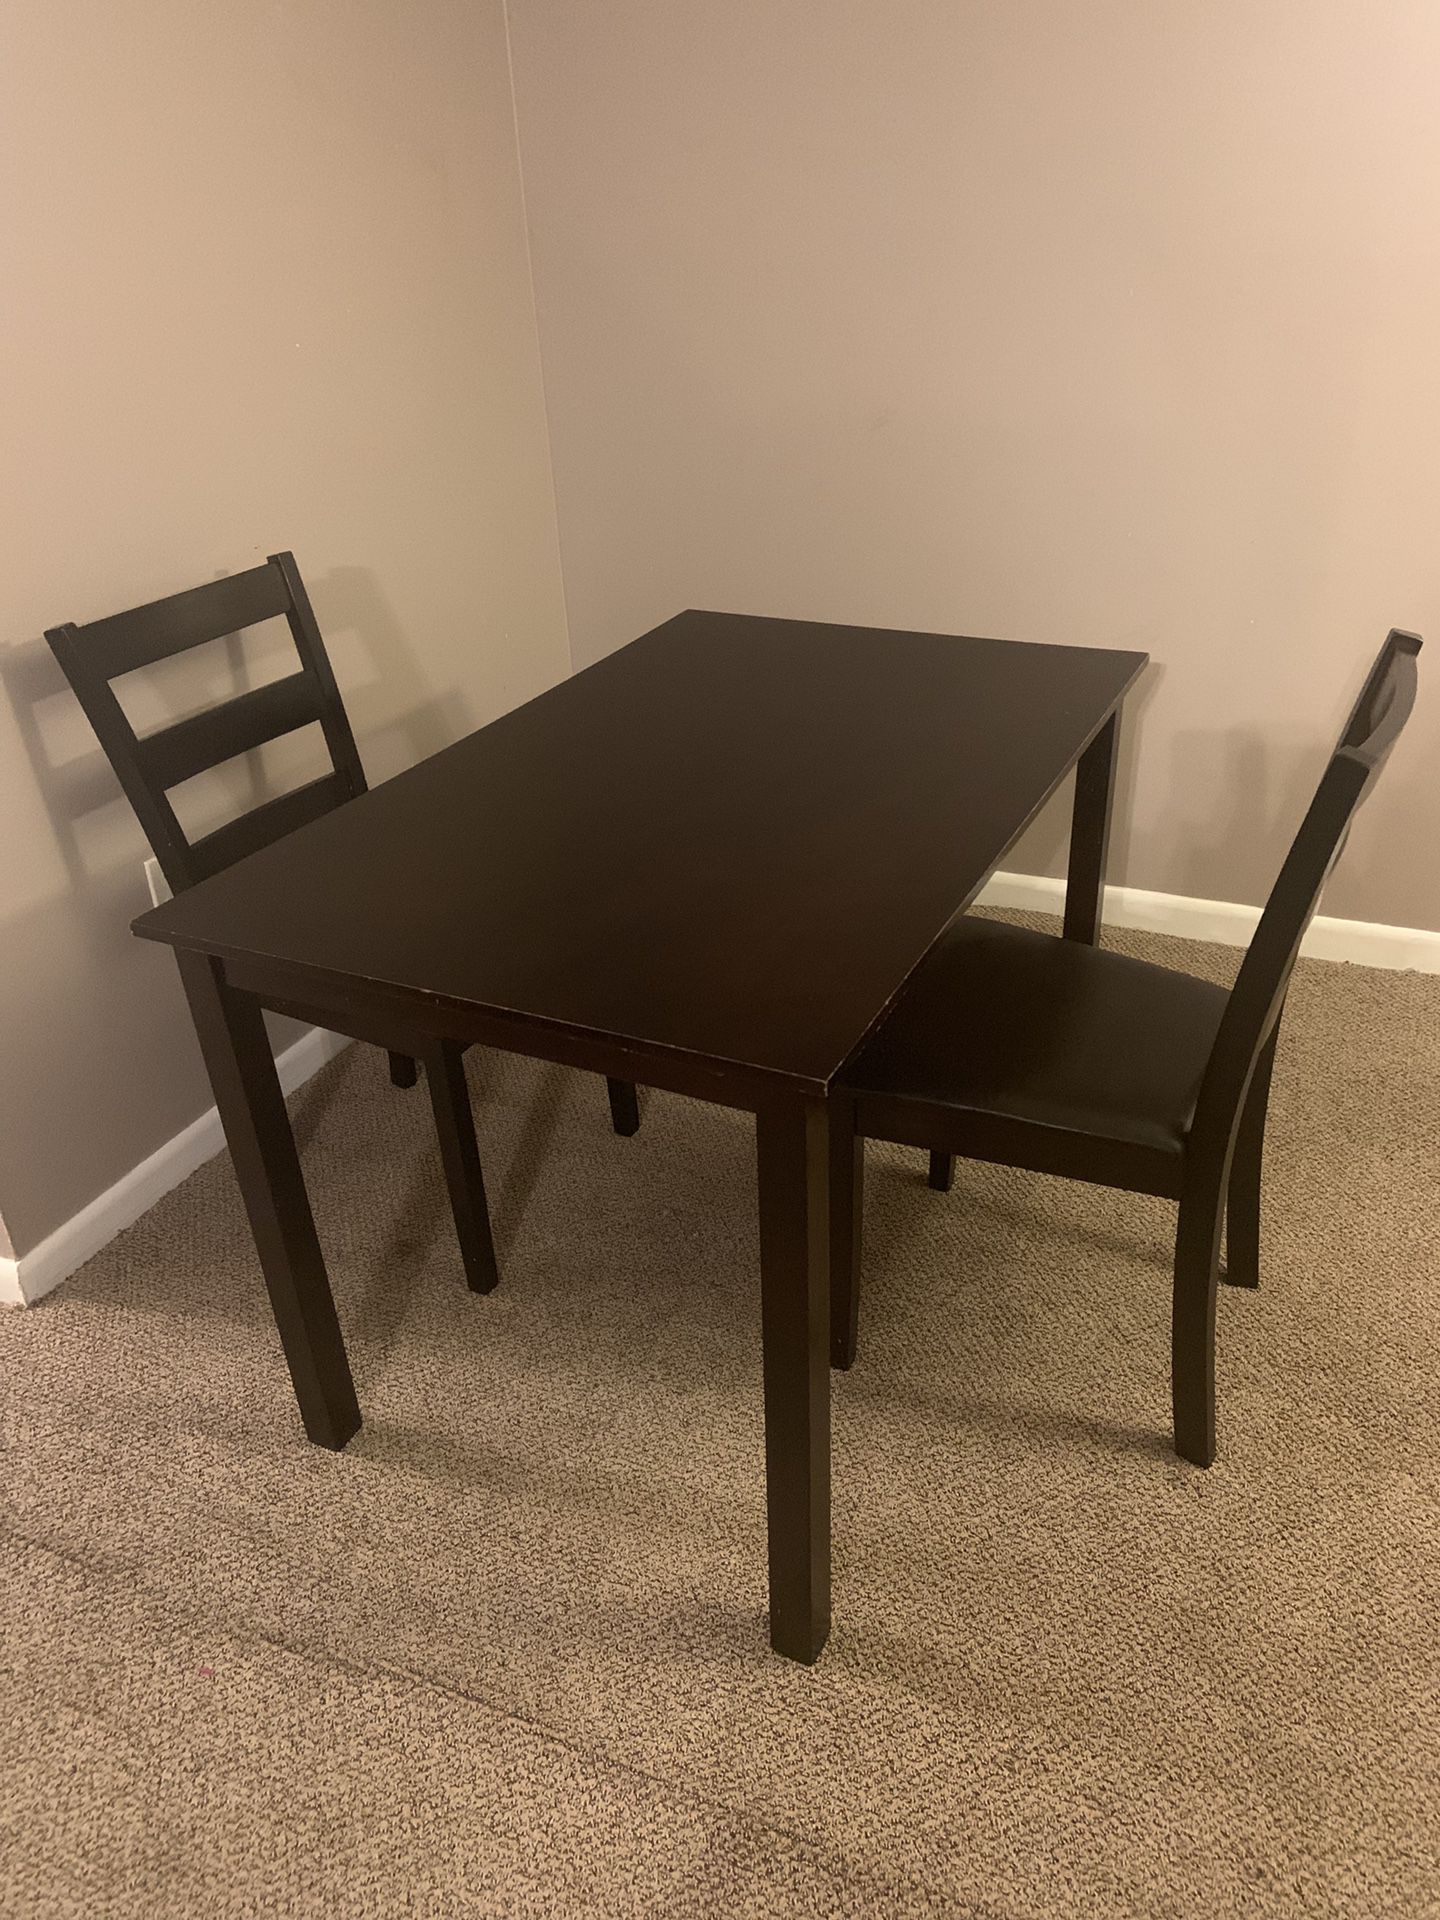 Wooden table and 2 chairs